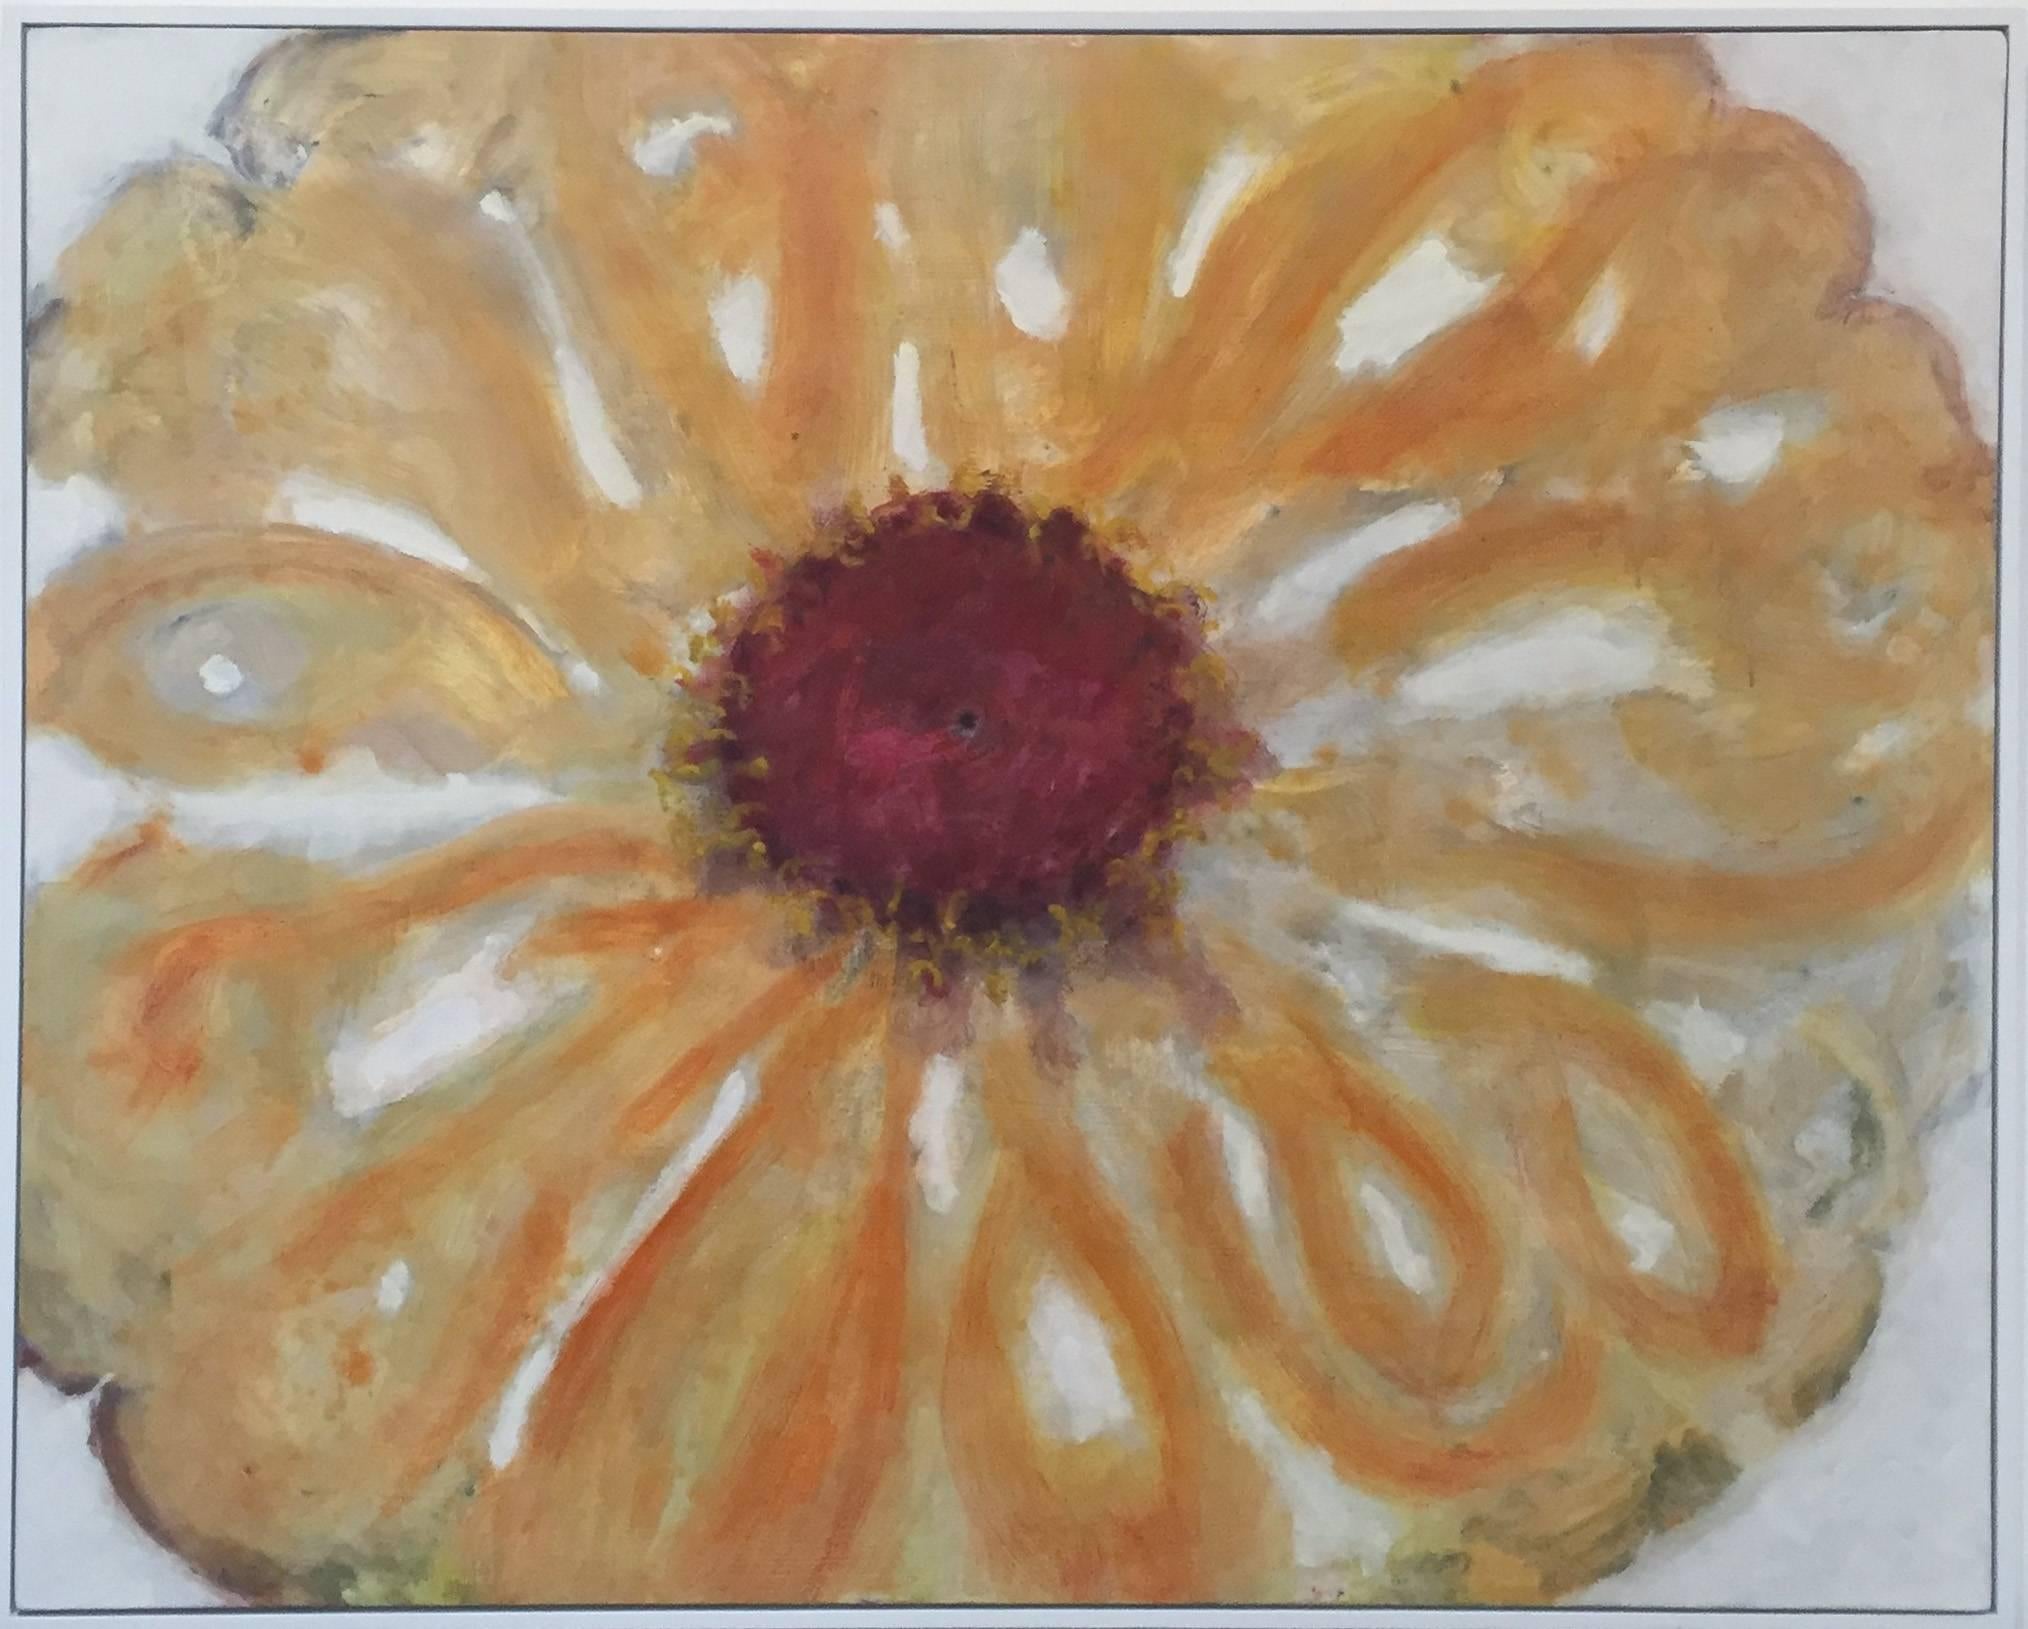 Oil on canvas
44 x 55 x 2 inches
Contemporary white artist made floater frame
This listing is available from Carrie Haddad Gallery, based in Hudson, NY.

Golden color fills the canvas with the lush leaves of a summer zinnia flower in a recent work